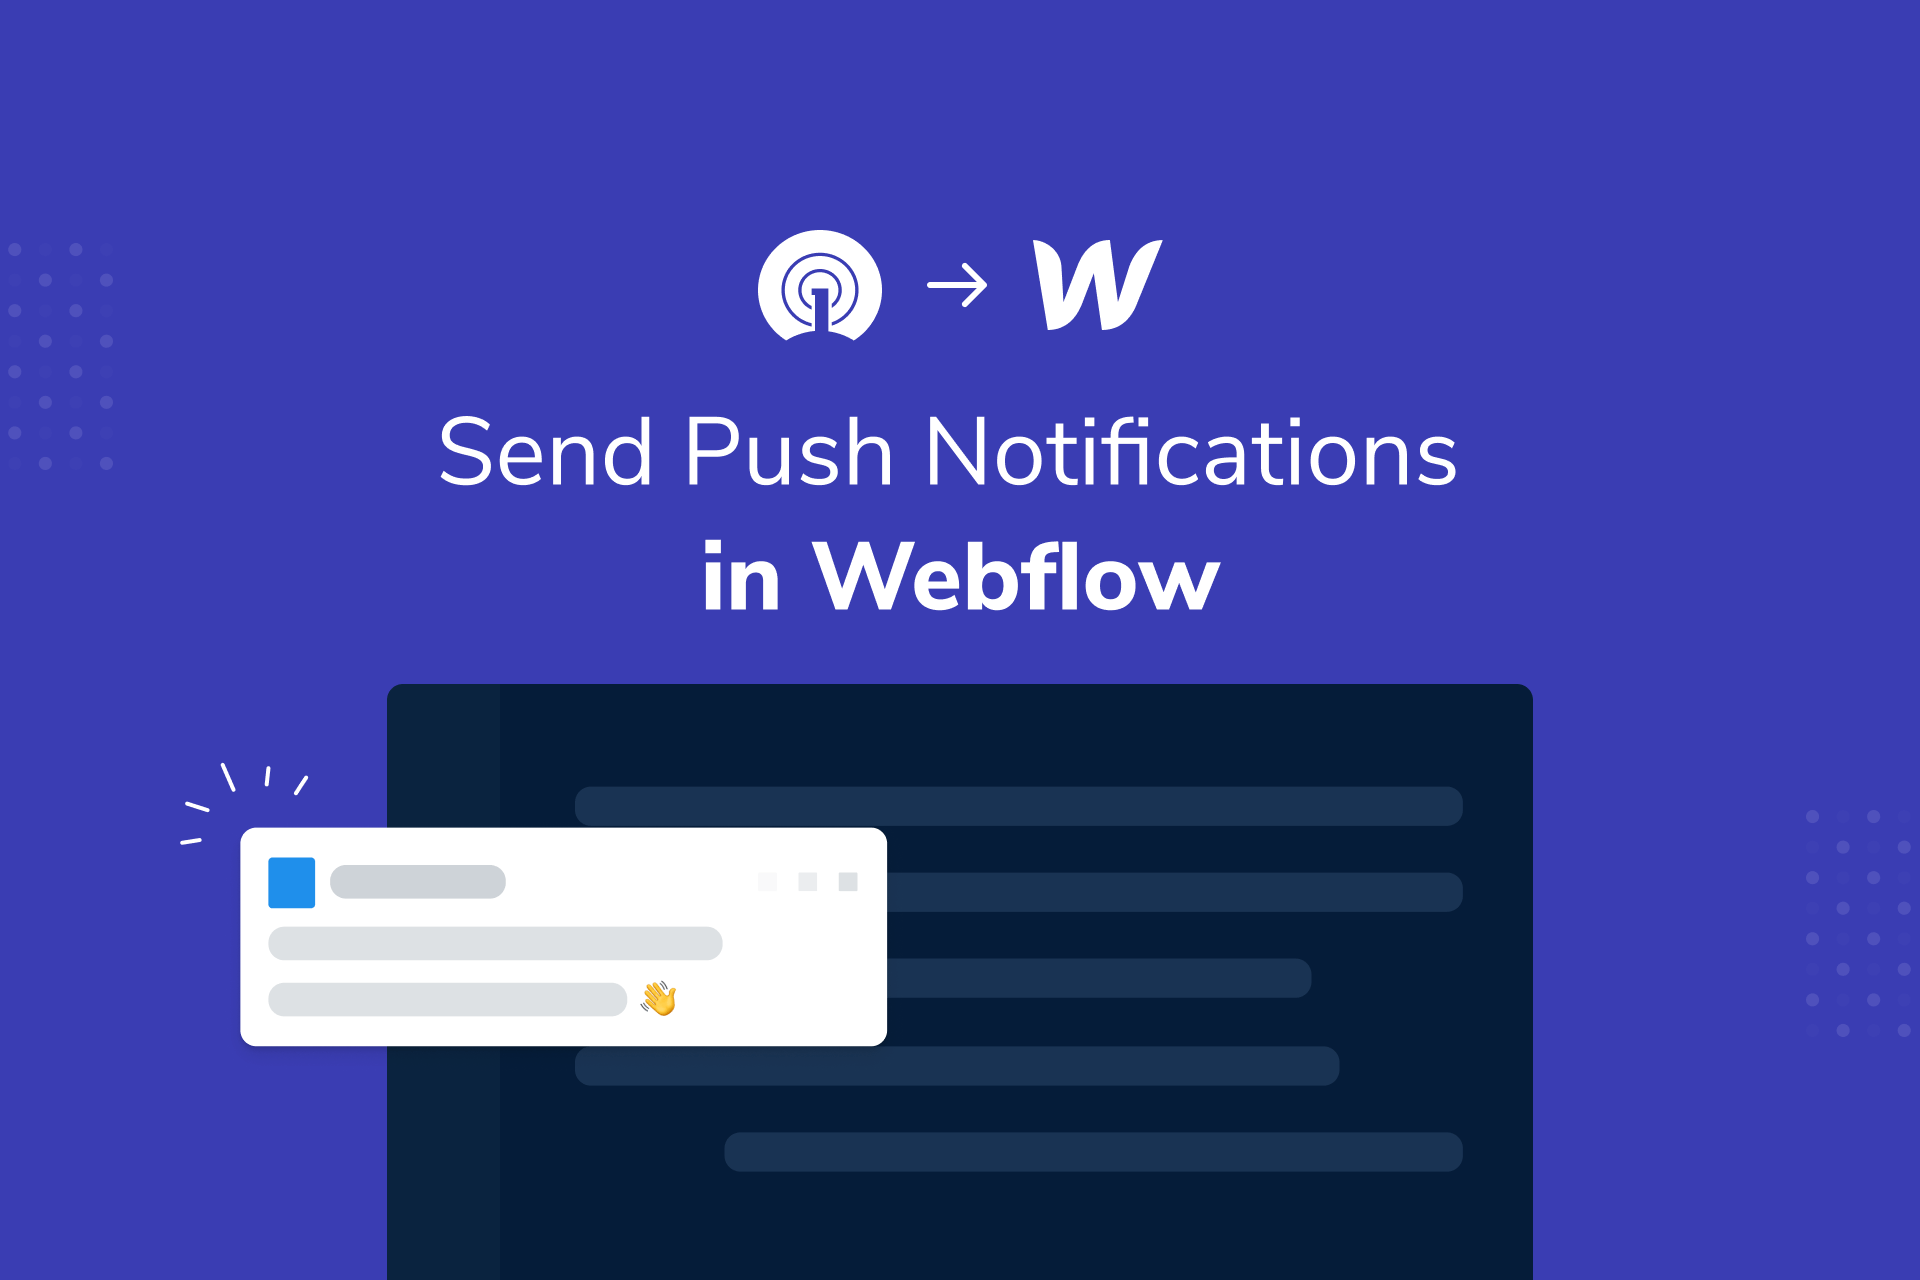 Webflow (as you probably know) is an amazing solution that can help you build a website without coding skills. While navigating through their blog one